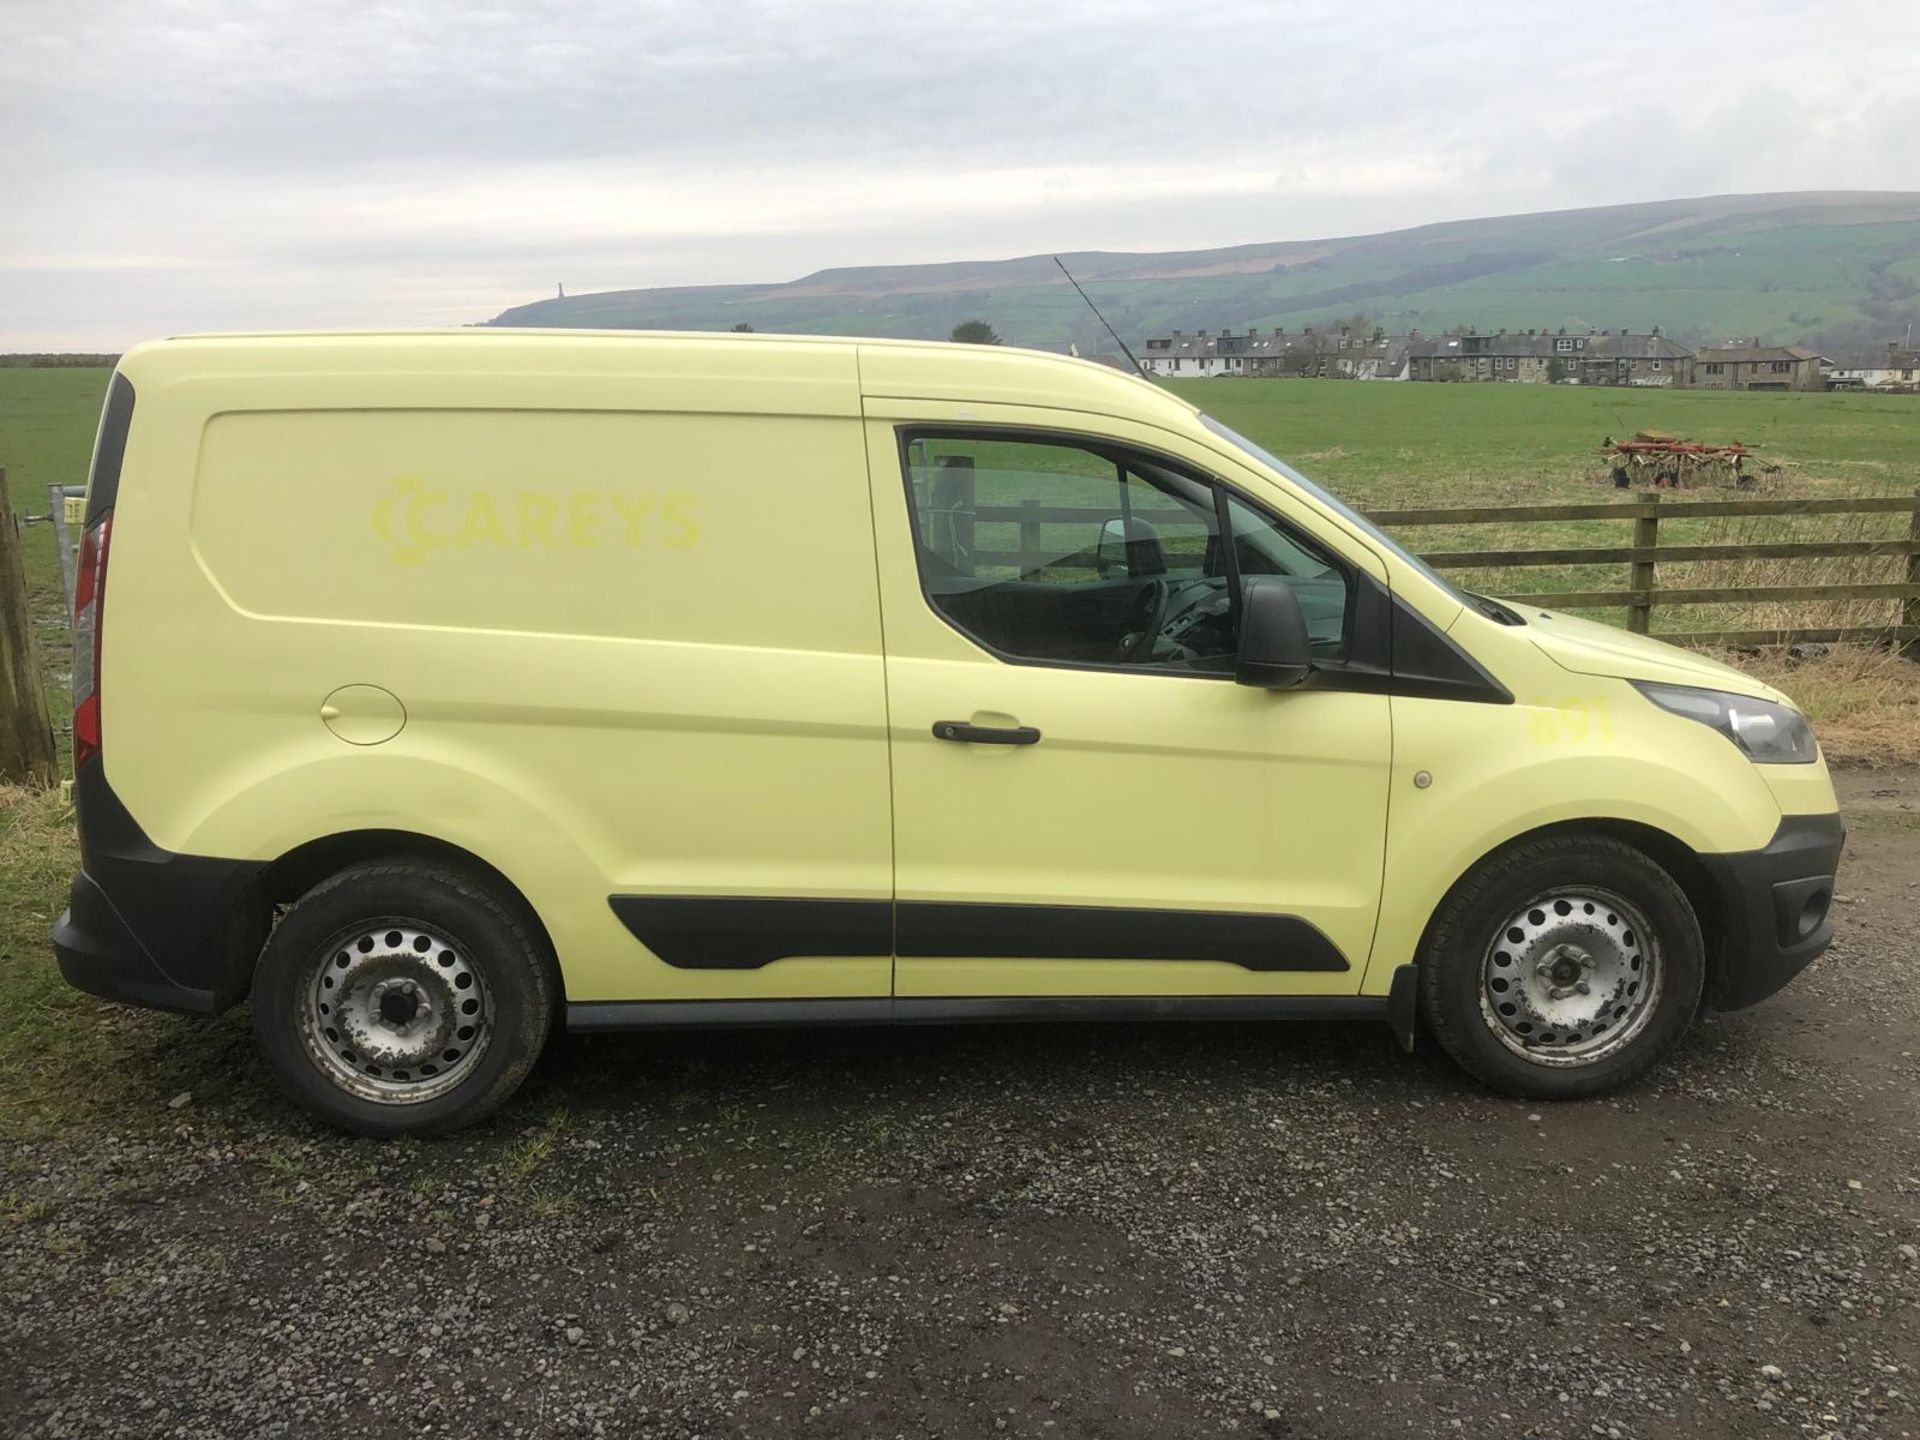 2015 FORD TRANSIT CONNECT 200 PANEL VAN - 1.6 TDCI - 91621 MILES - Image 13 of 15